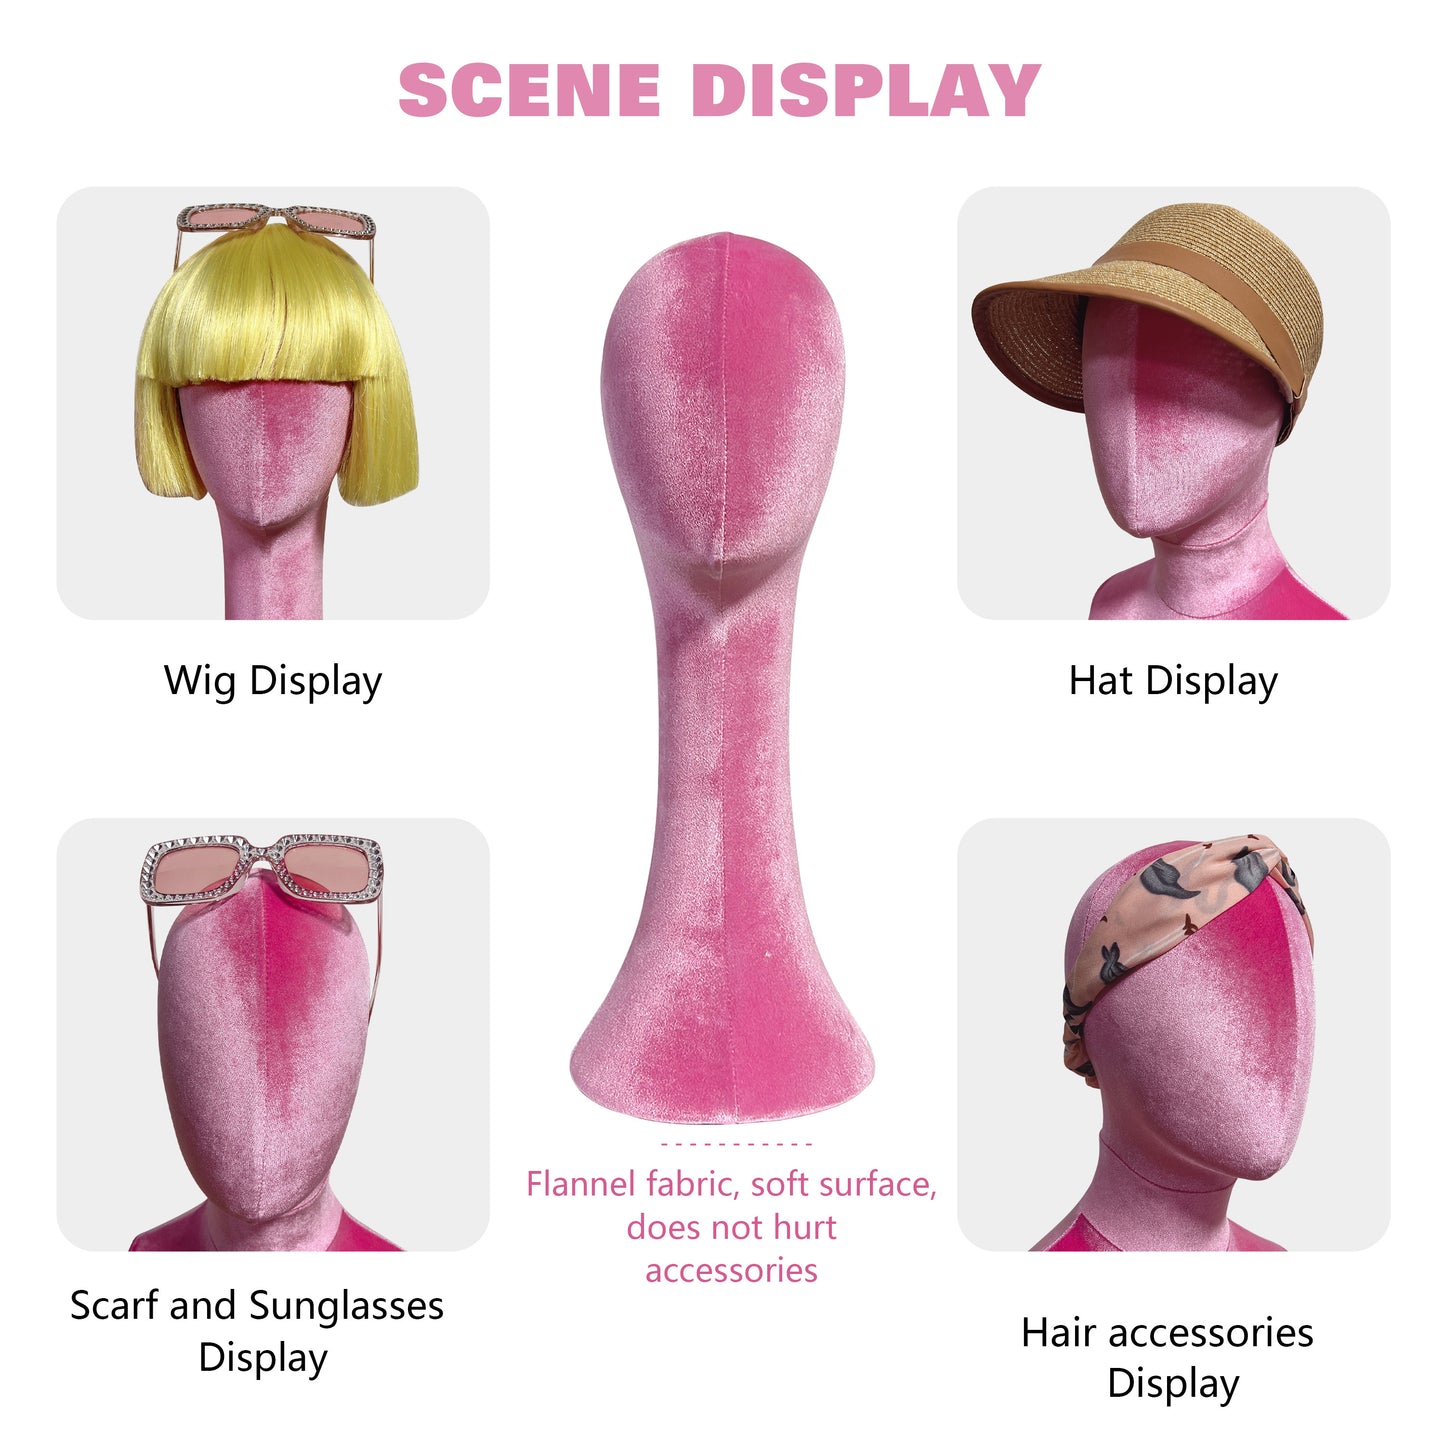 Luxurious Pink Velvet Head Model, Fully Pinnable Cloth Head Mannequin, Head Hat Stand/Display, lace Head Wig Stand, Hat Rack w/ Fabric DLA45-VPK/DLA38-VPK/DLA50-VPK